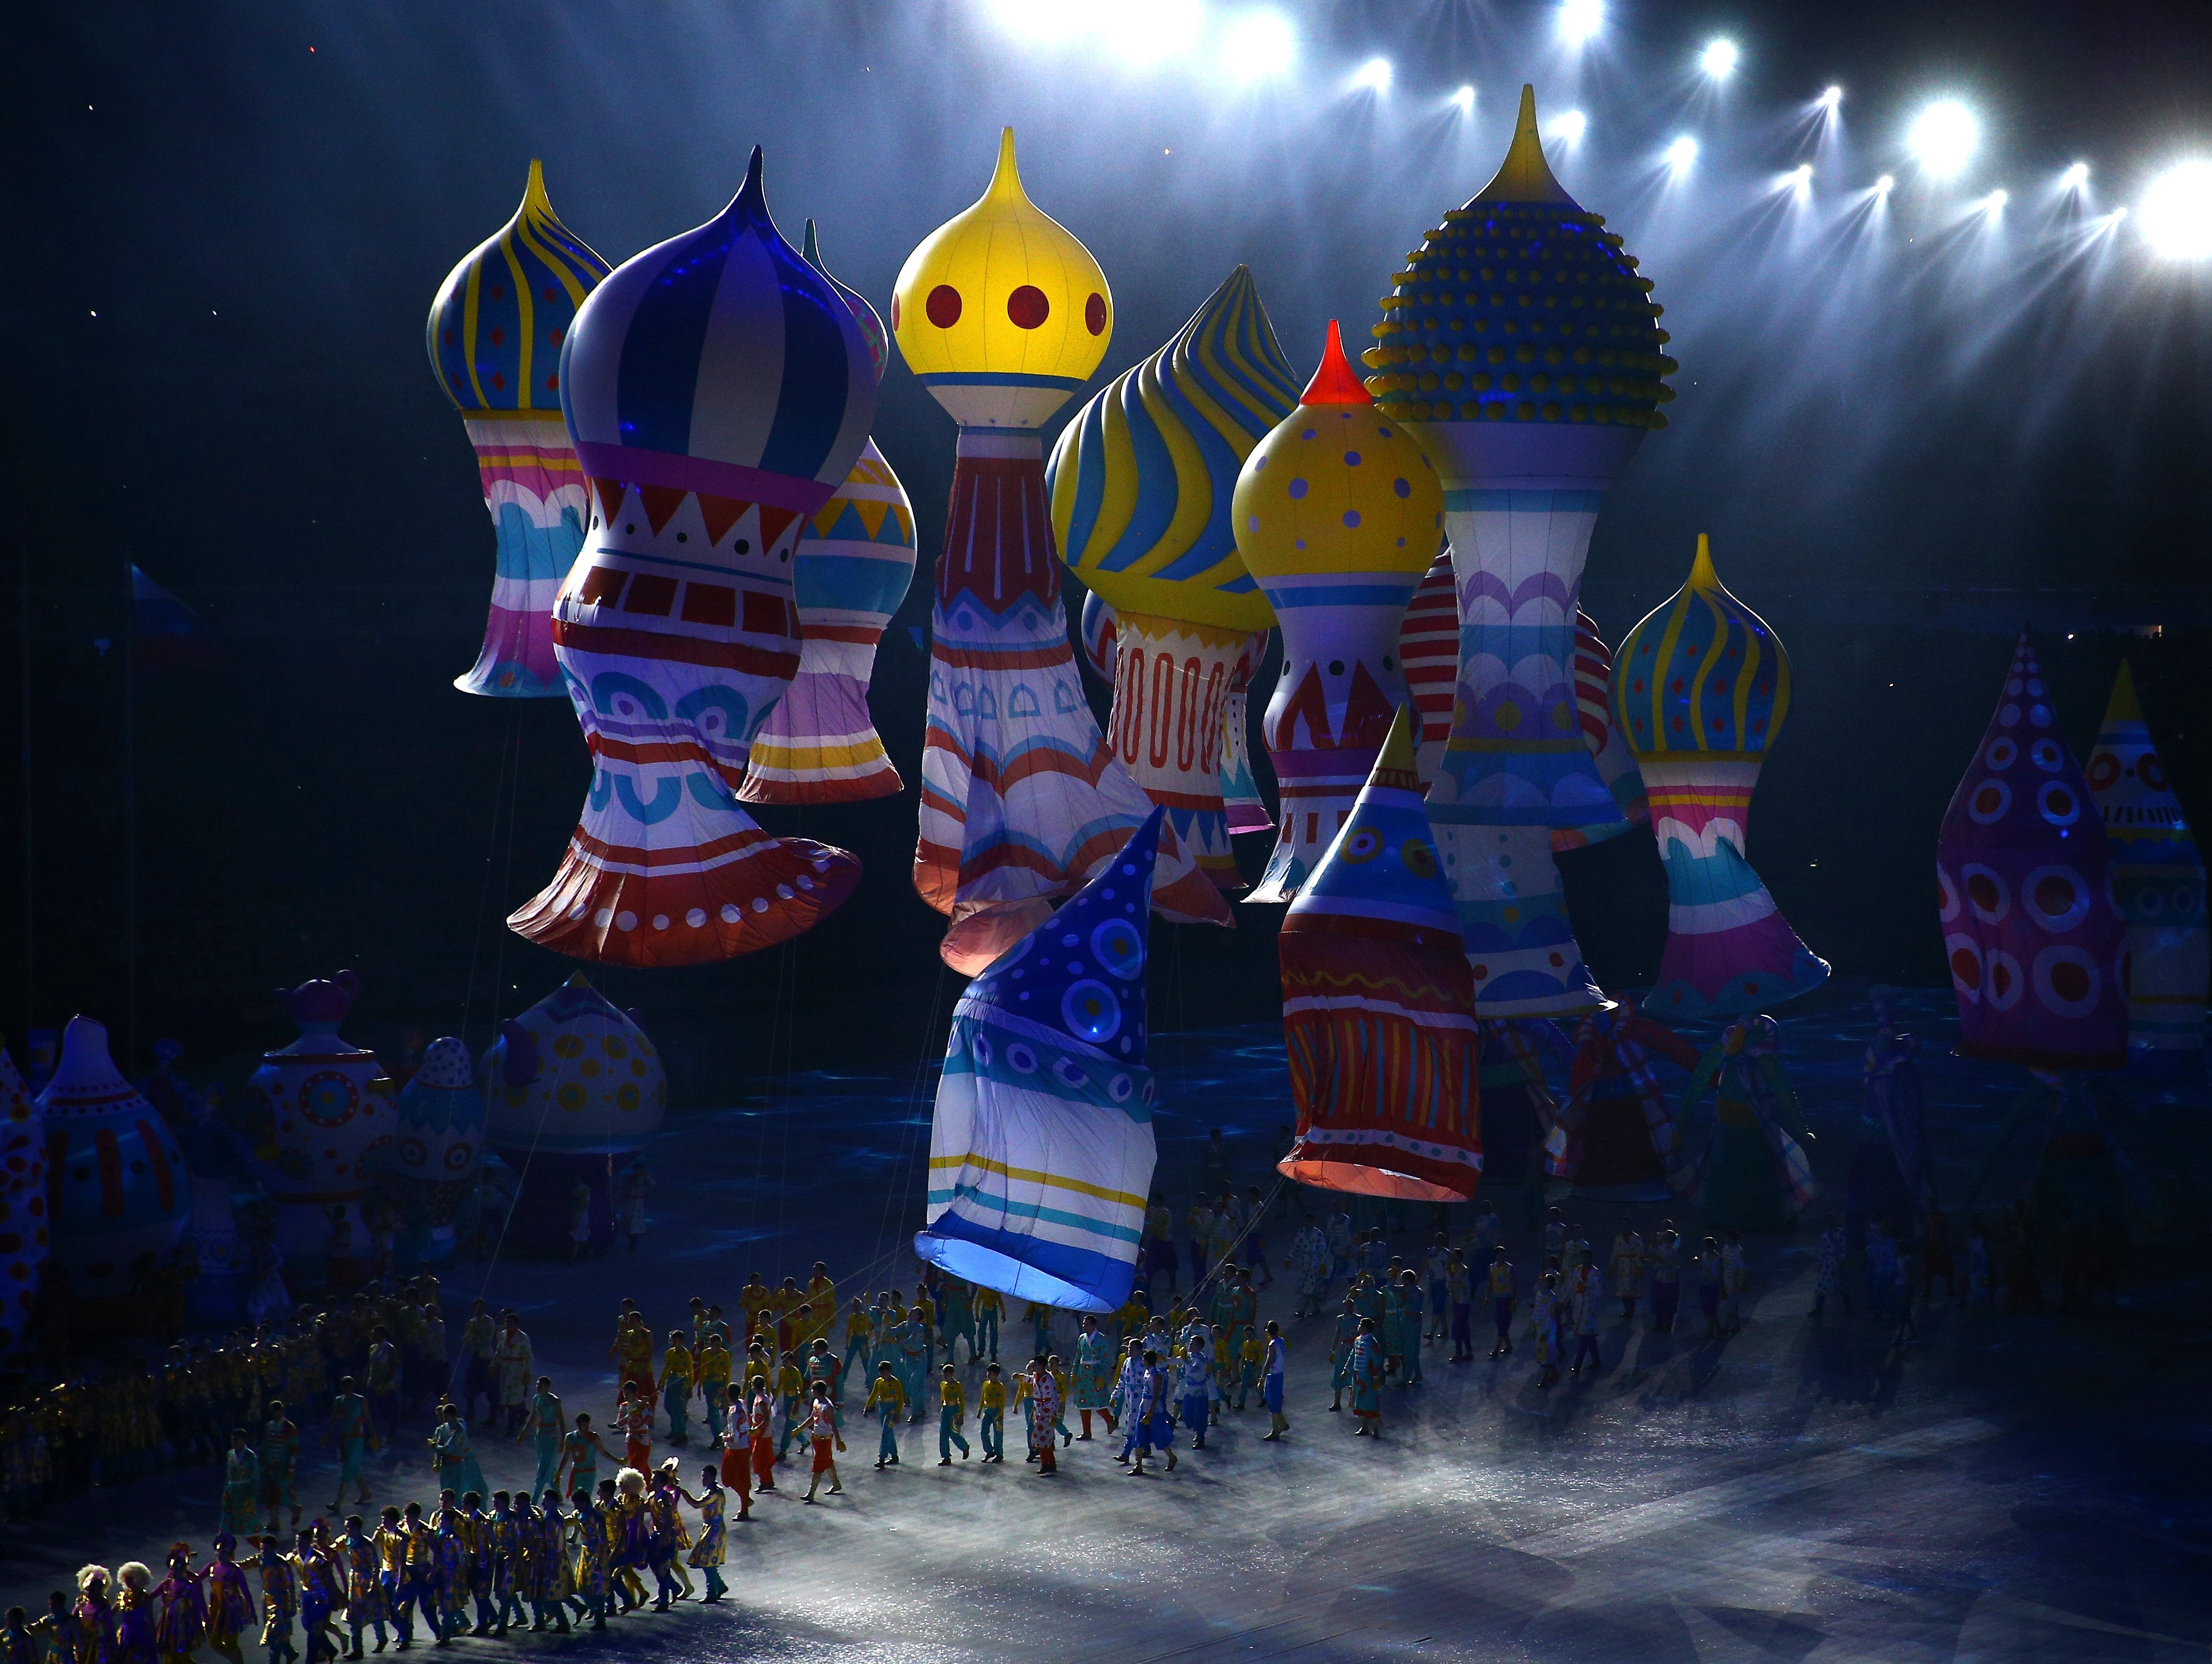 Performers with balloons representing St. Basil's cathedral. (Clive Mason / Getty Images)